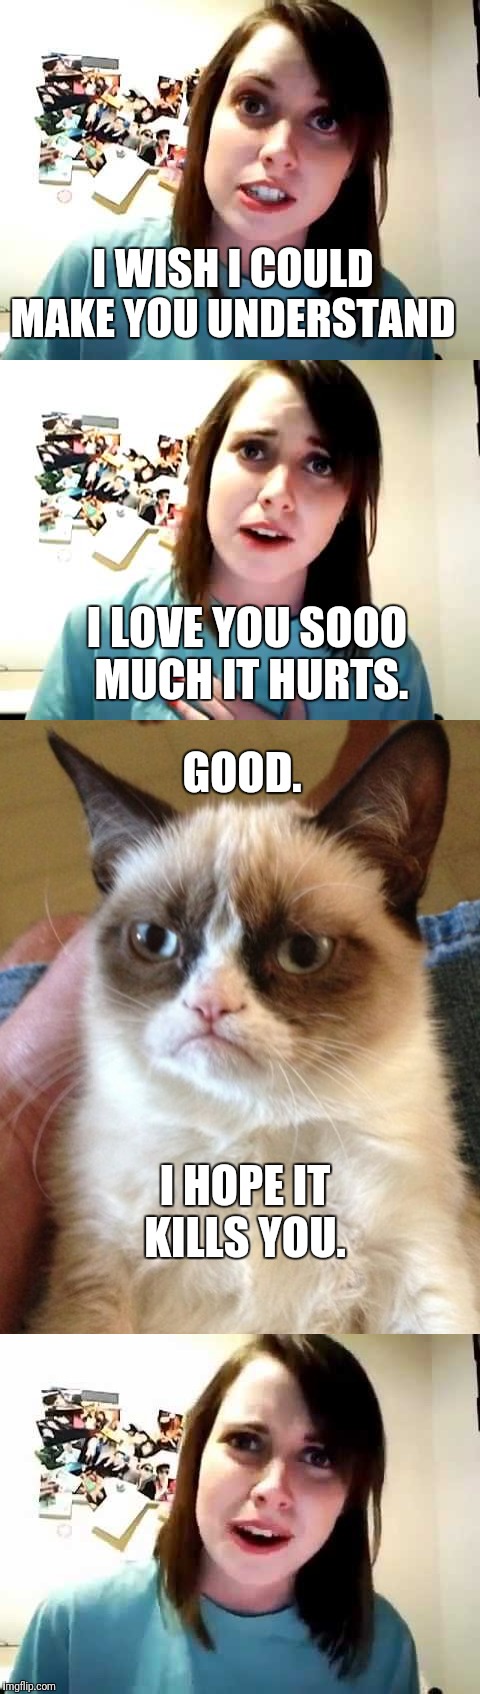 You deserve it. | I WISH I COULD MAKE YOU UNDERSTAND; I LOVE YOU SOOO MUCH IT HURTS. GOOD. I HOPE IT KILLS YOU. | image tagged in grumpy cat,overly attached girlfriend | made w/ Imgflip meme maker